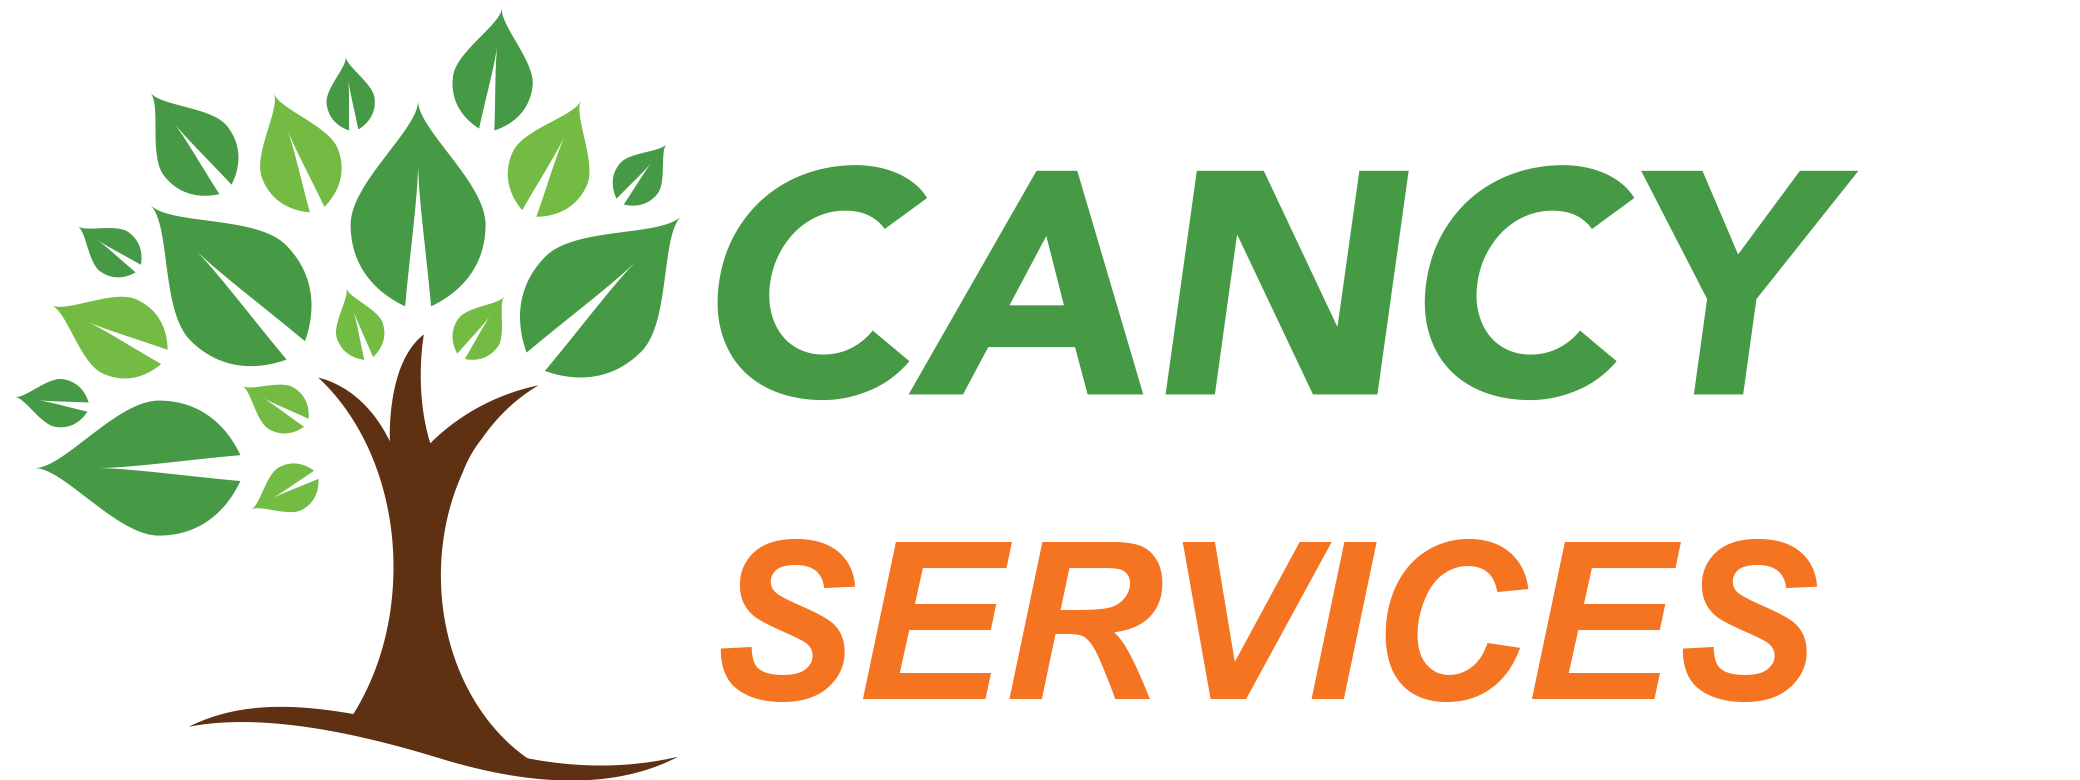 Cancy Services